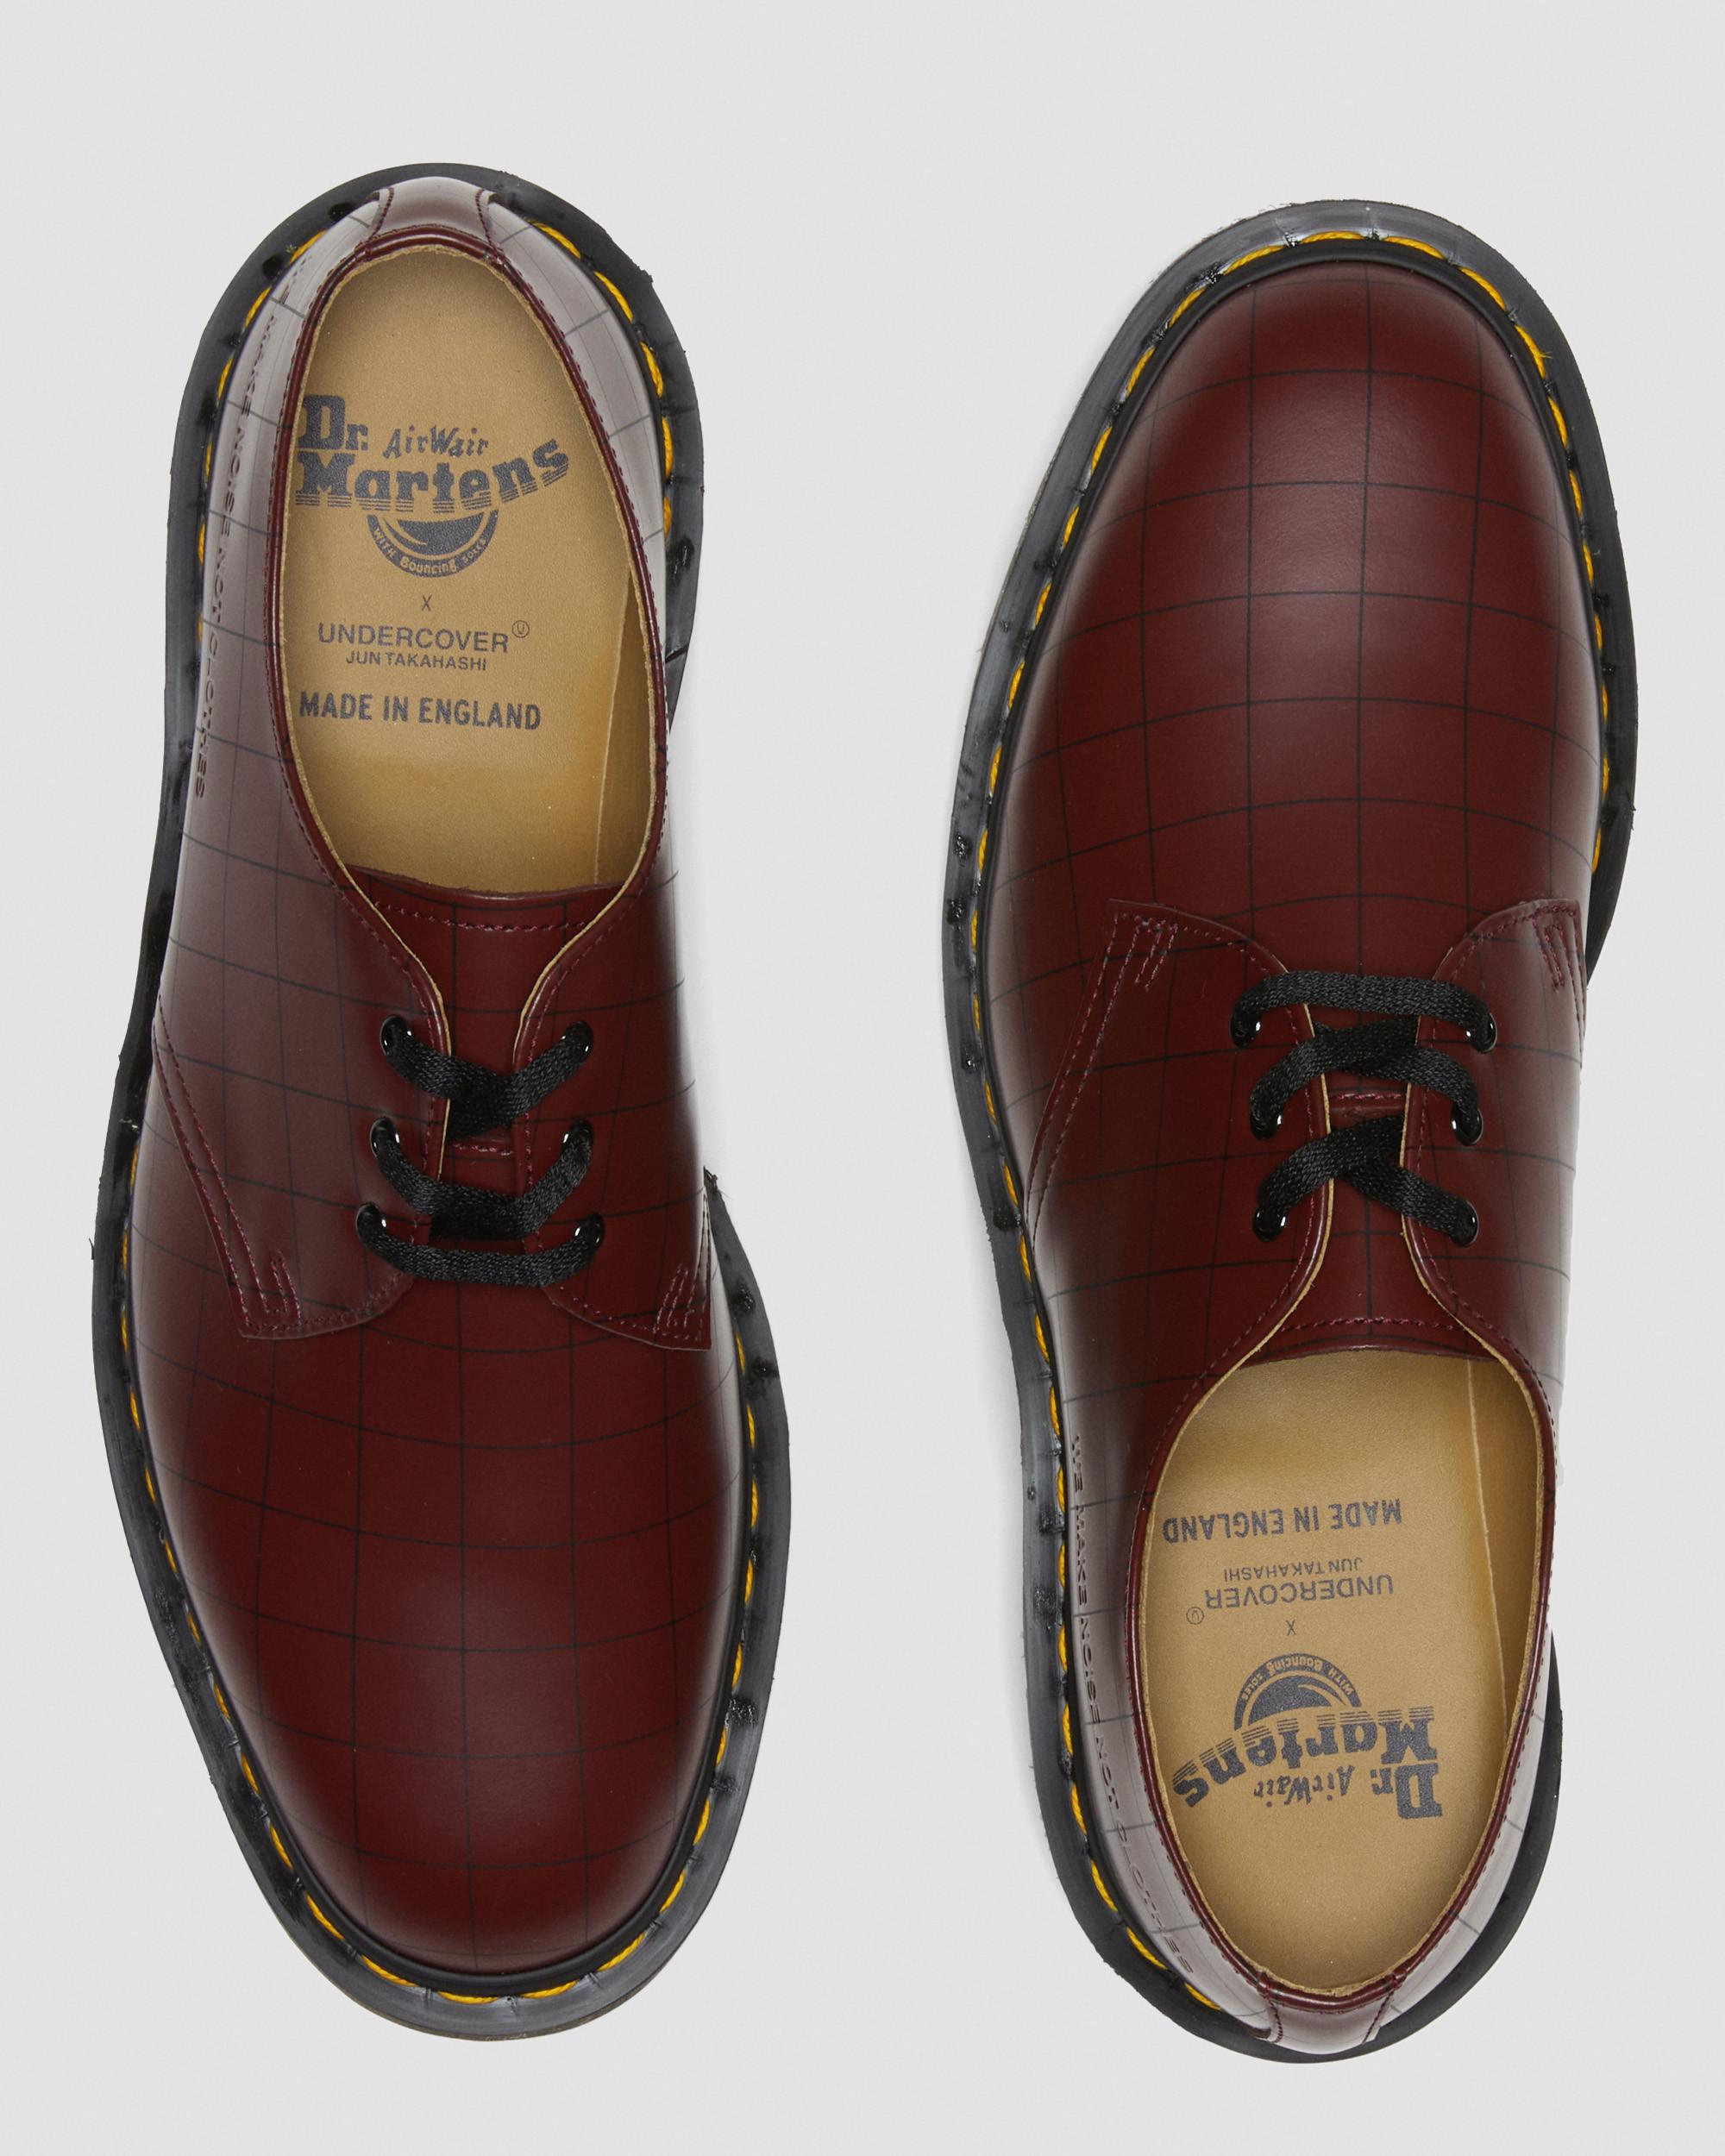 1461 Undercover Smooth Leather Shoes1461 Undercover Smooth Leather Shoes Dr. Martens